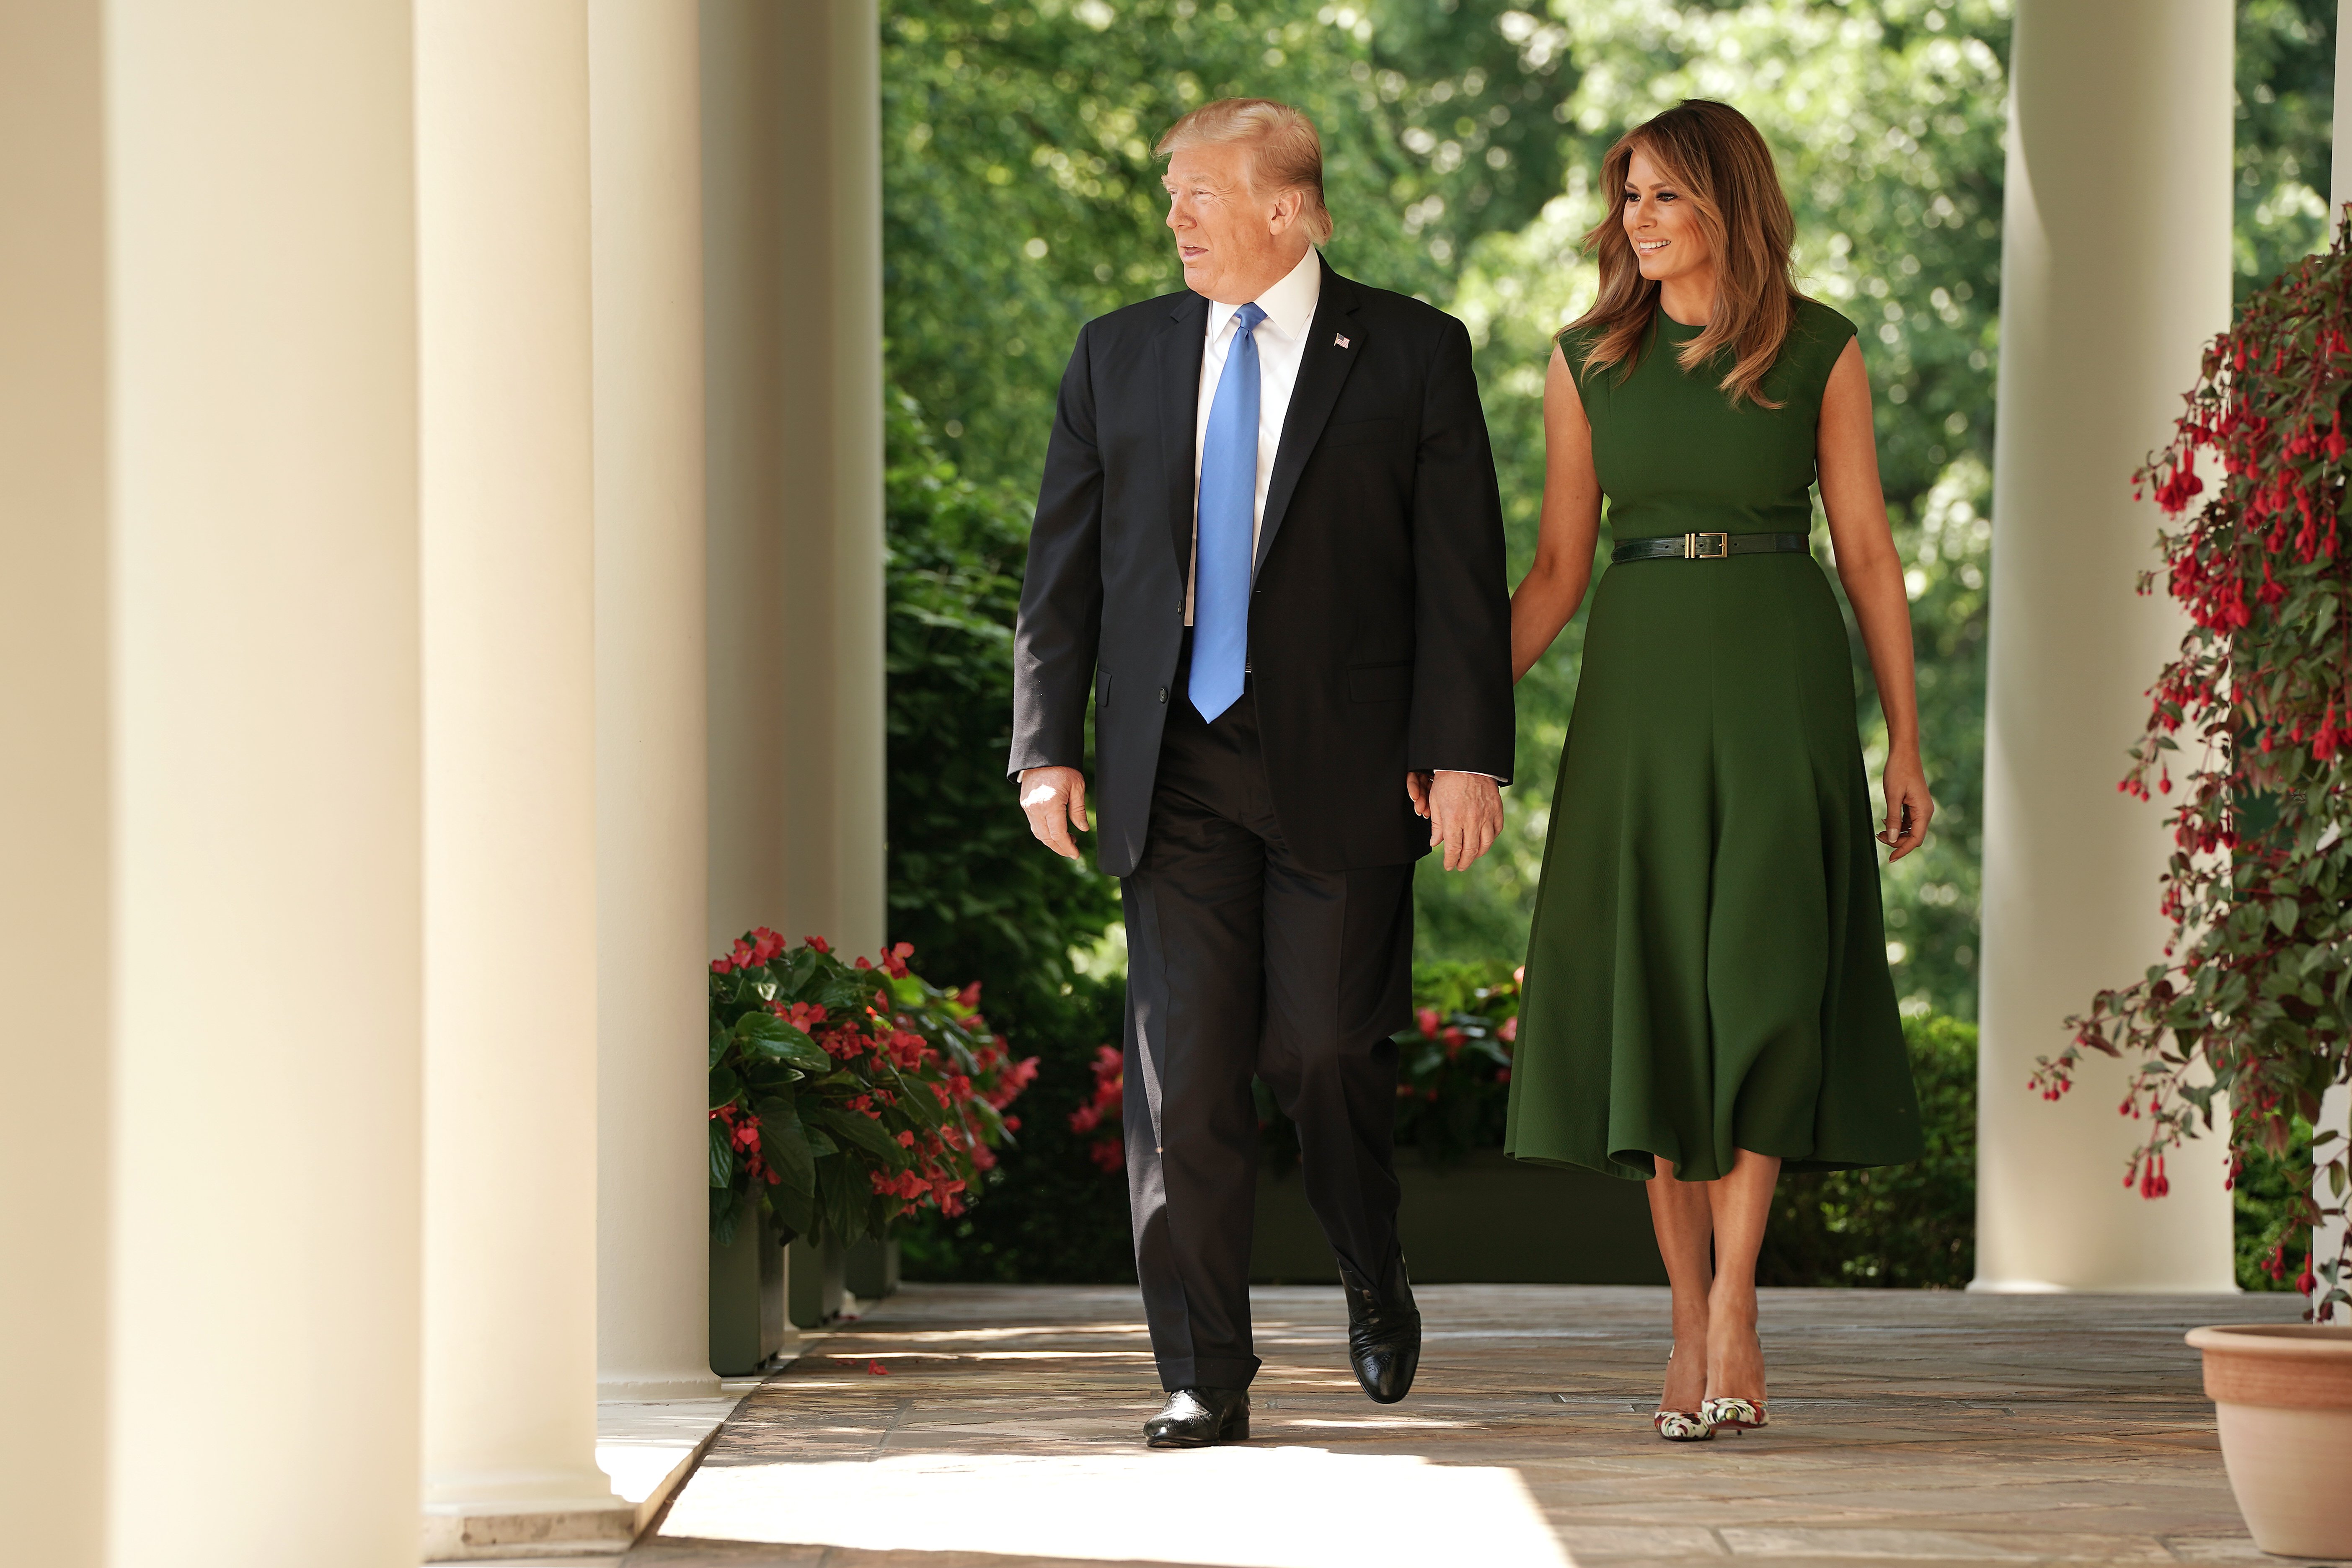 President Donald Trump and First Lady Melania Trump | Photo: Getty Images